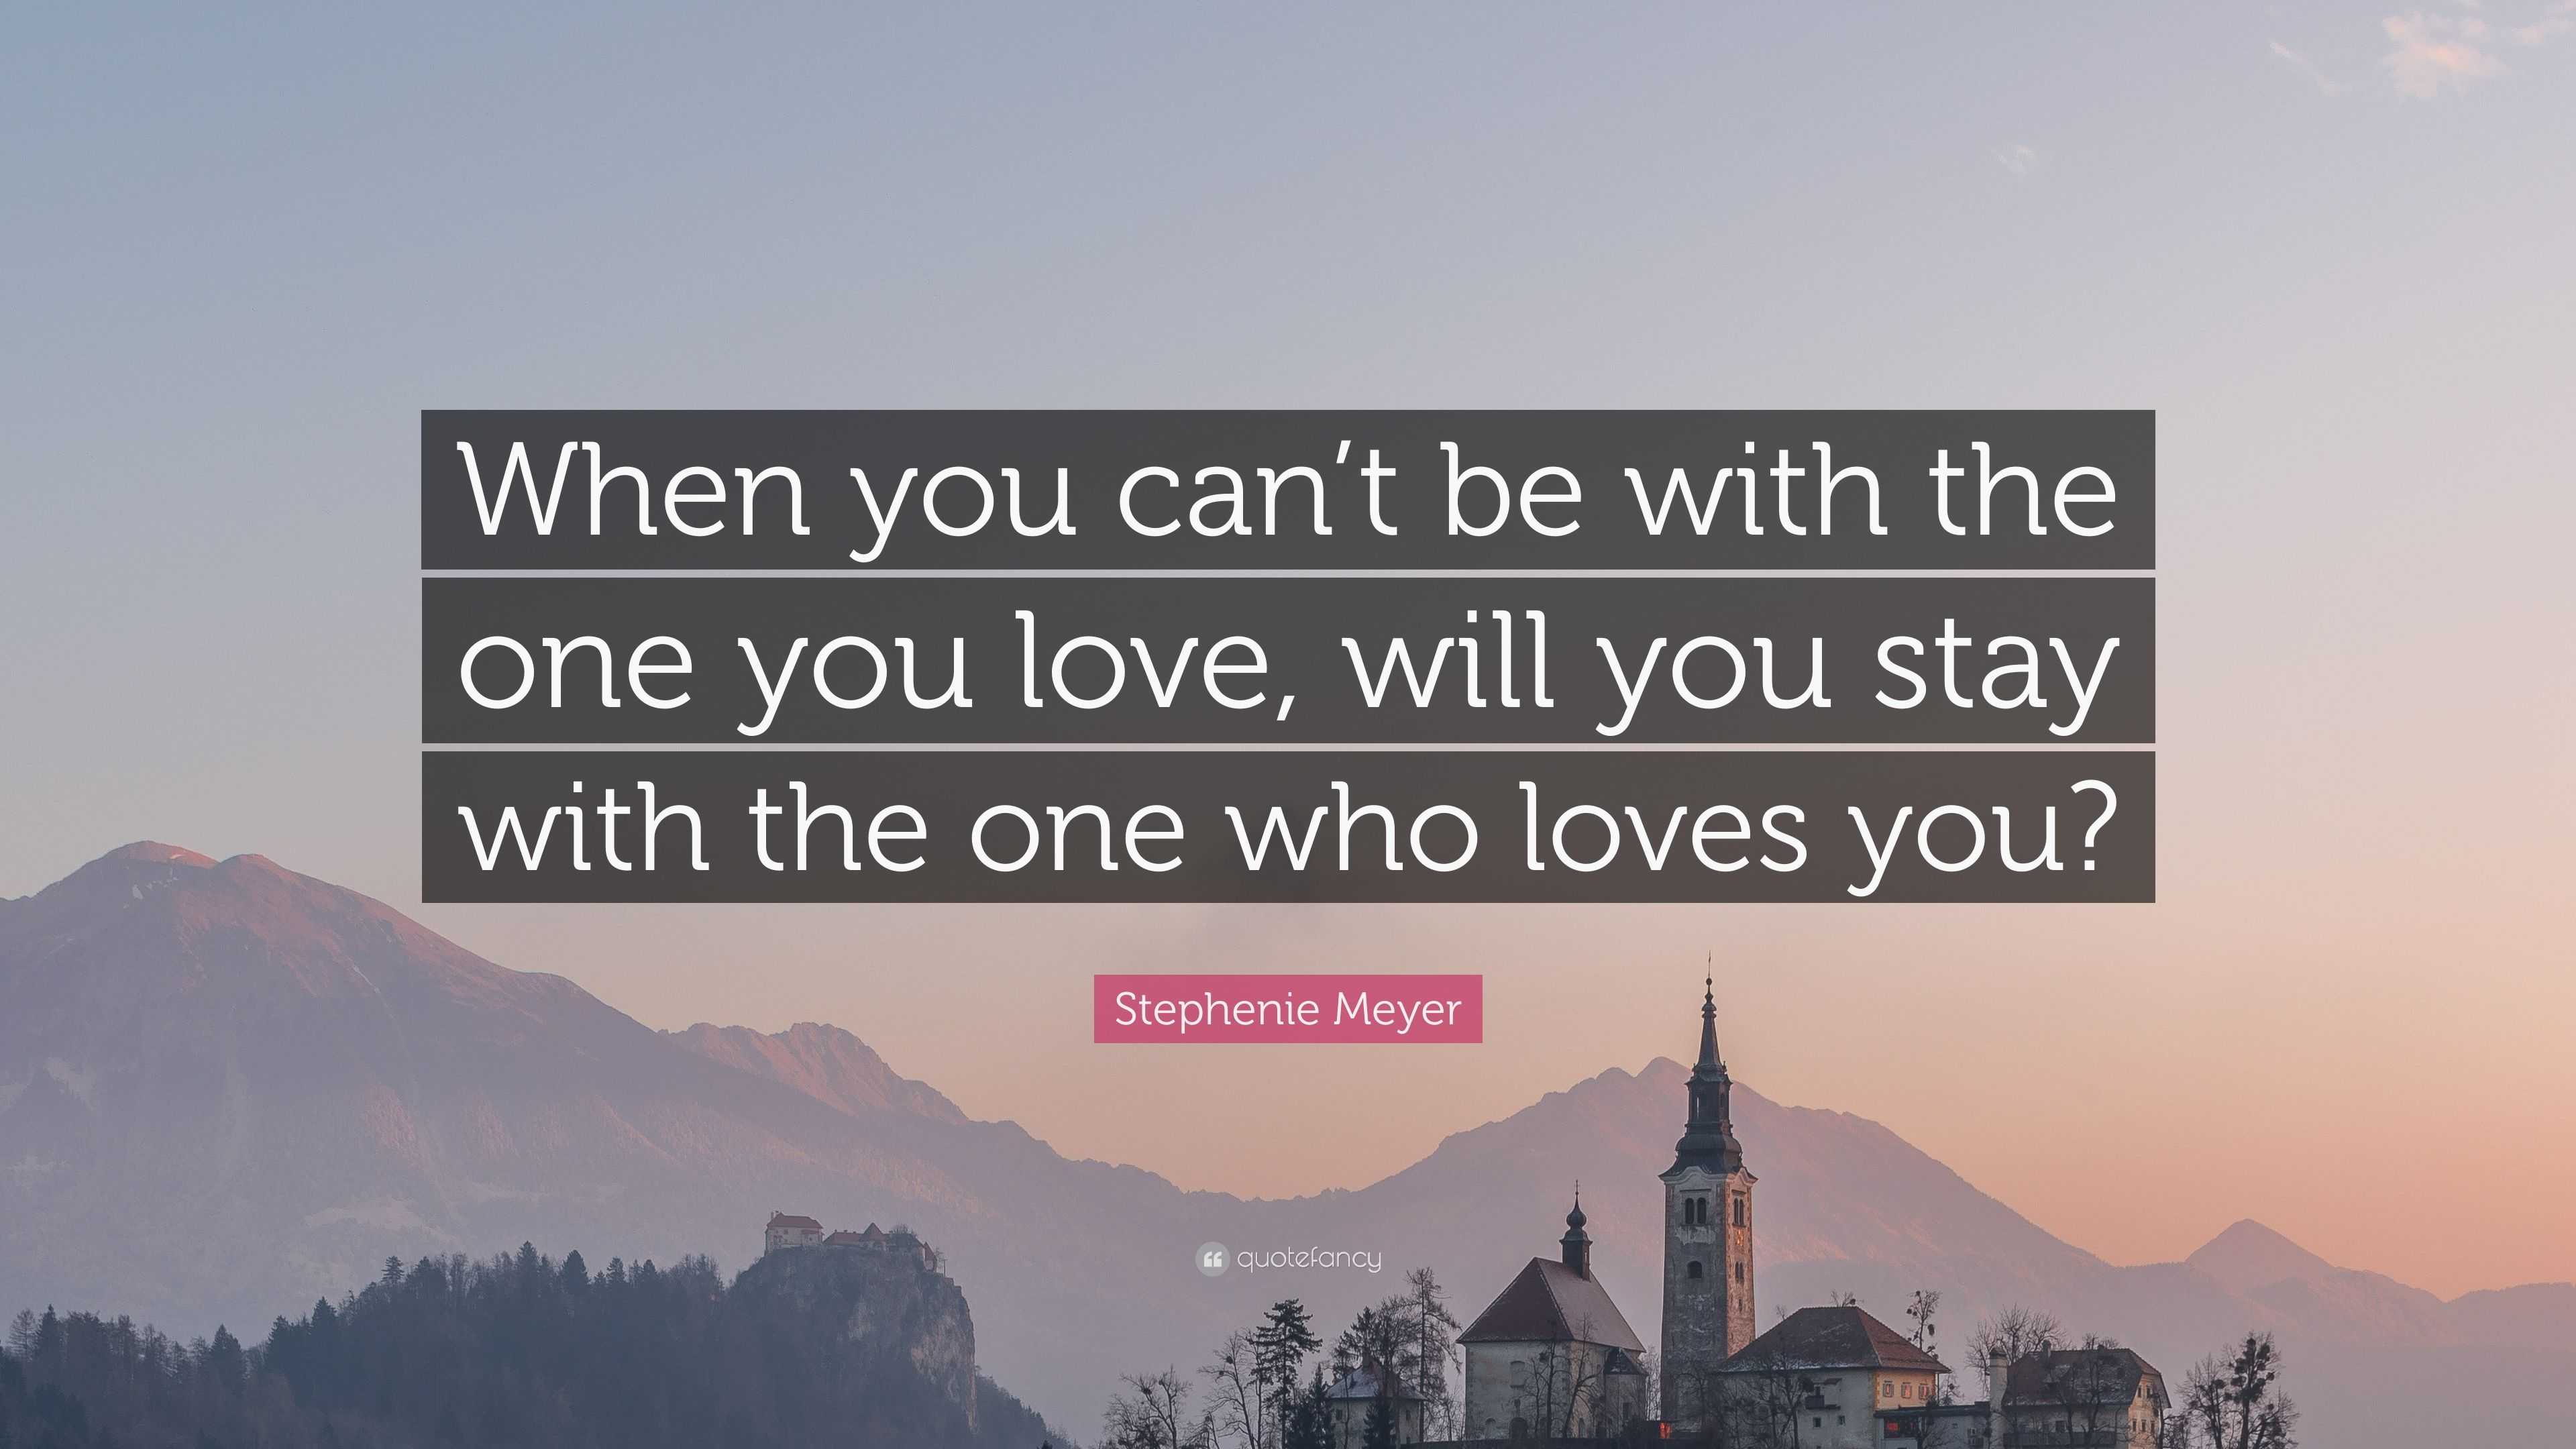 Stephenie Meyer Quote: “When you can’t be with the one you love, will ...